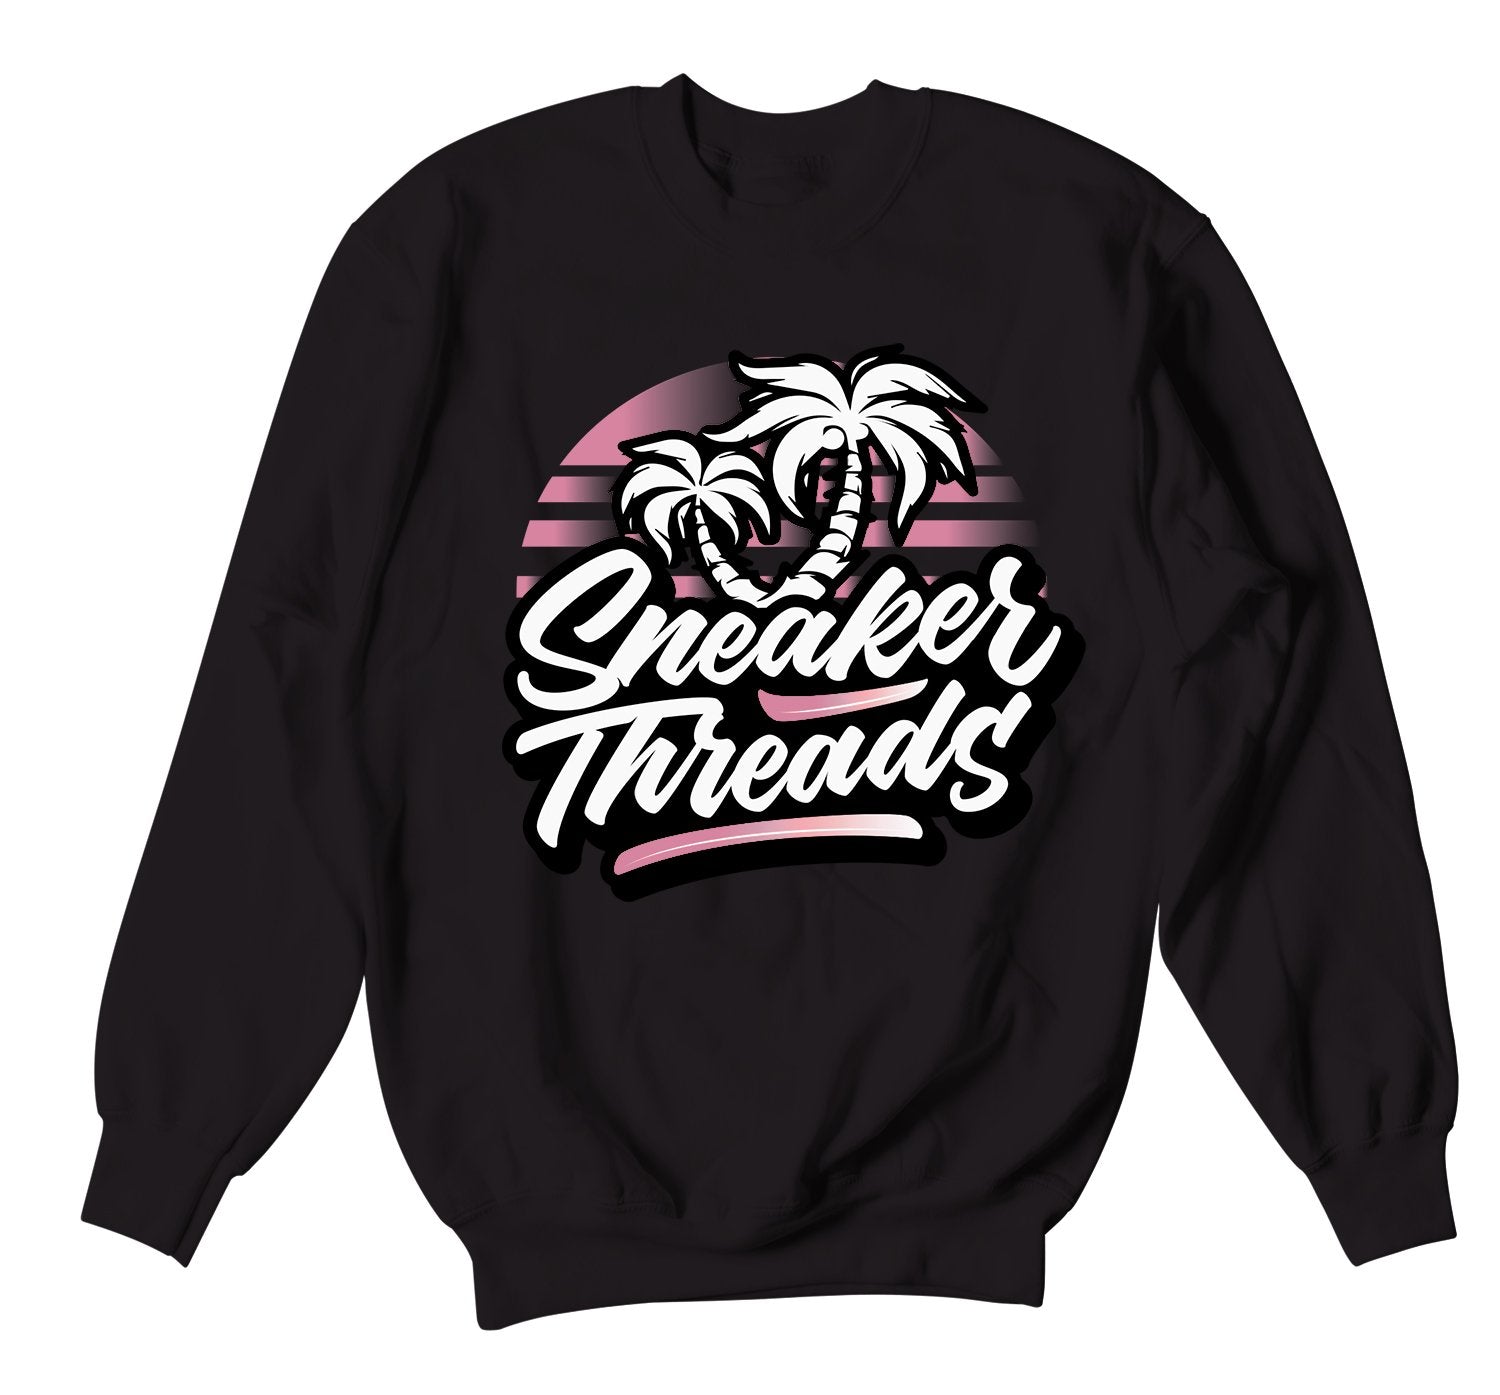 Crewneck collection for men has matching kd aunt pearl sneaker collection 